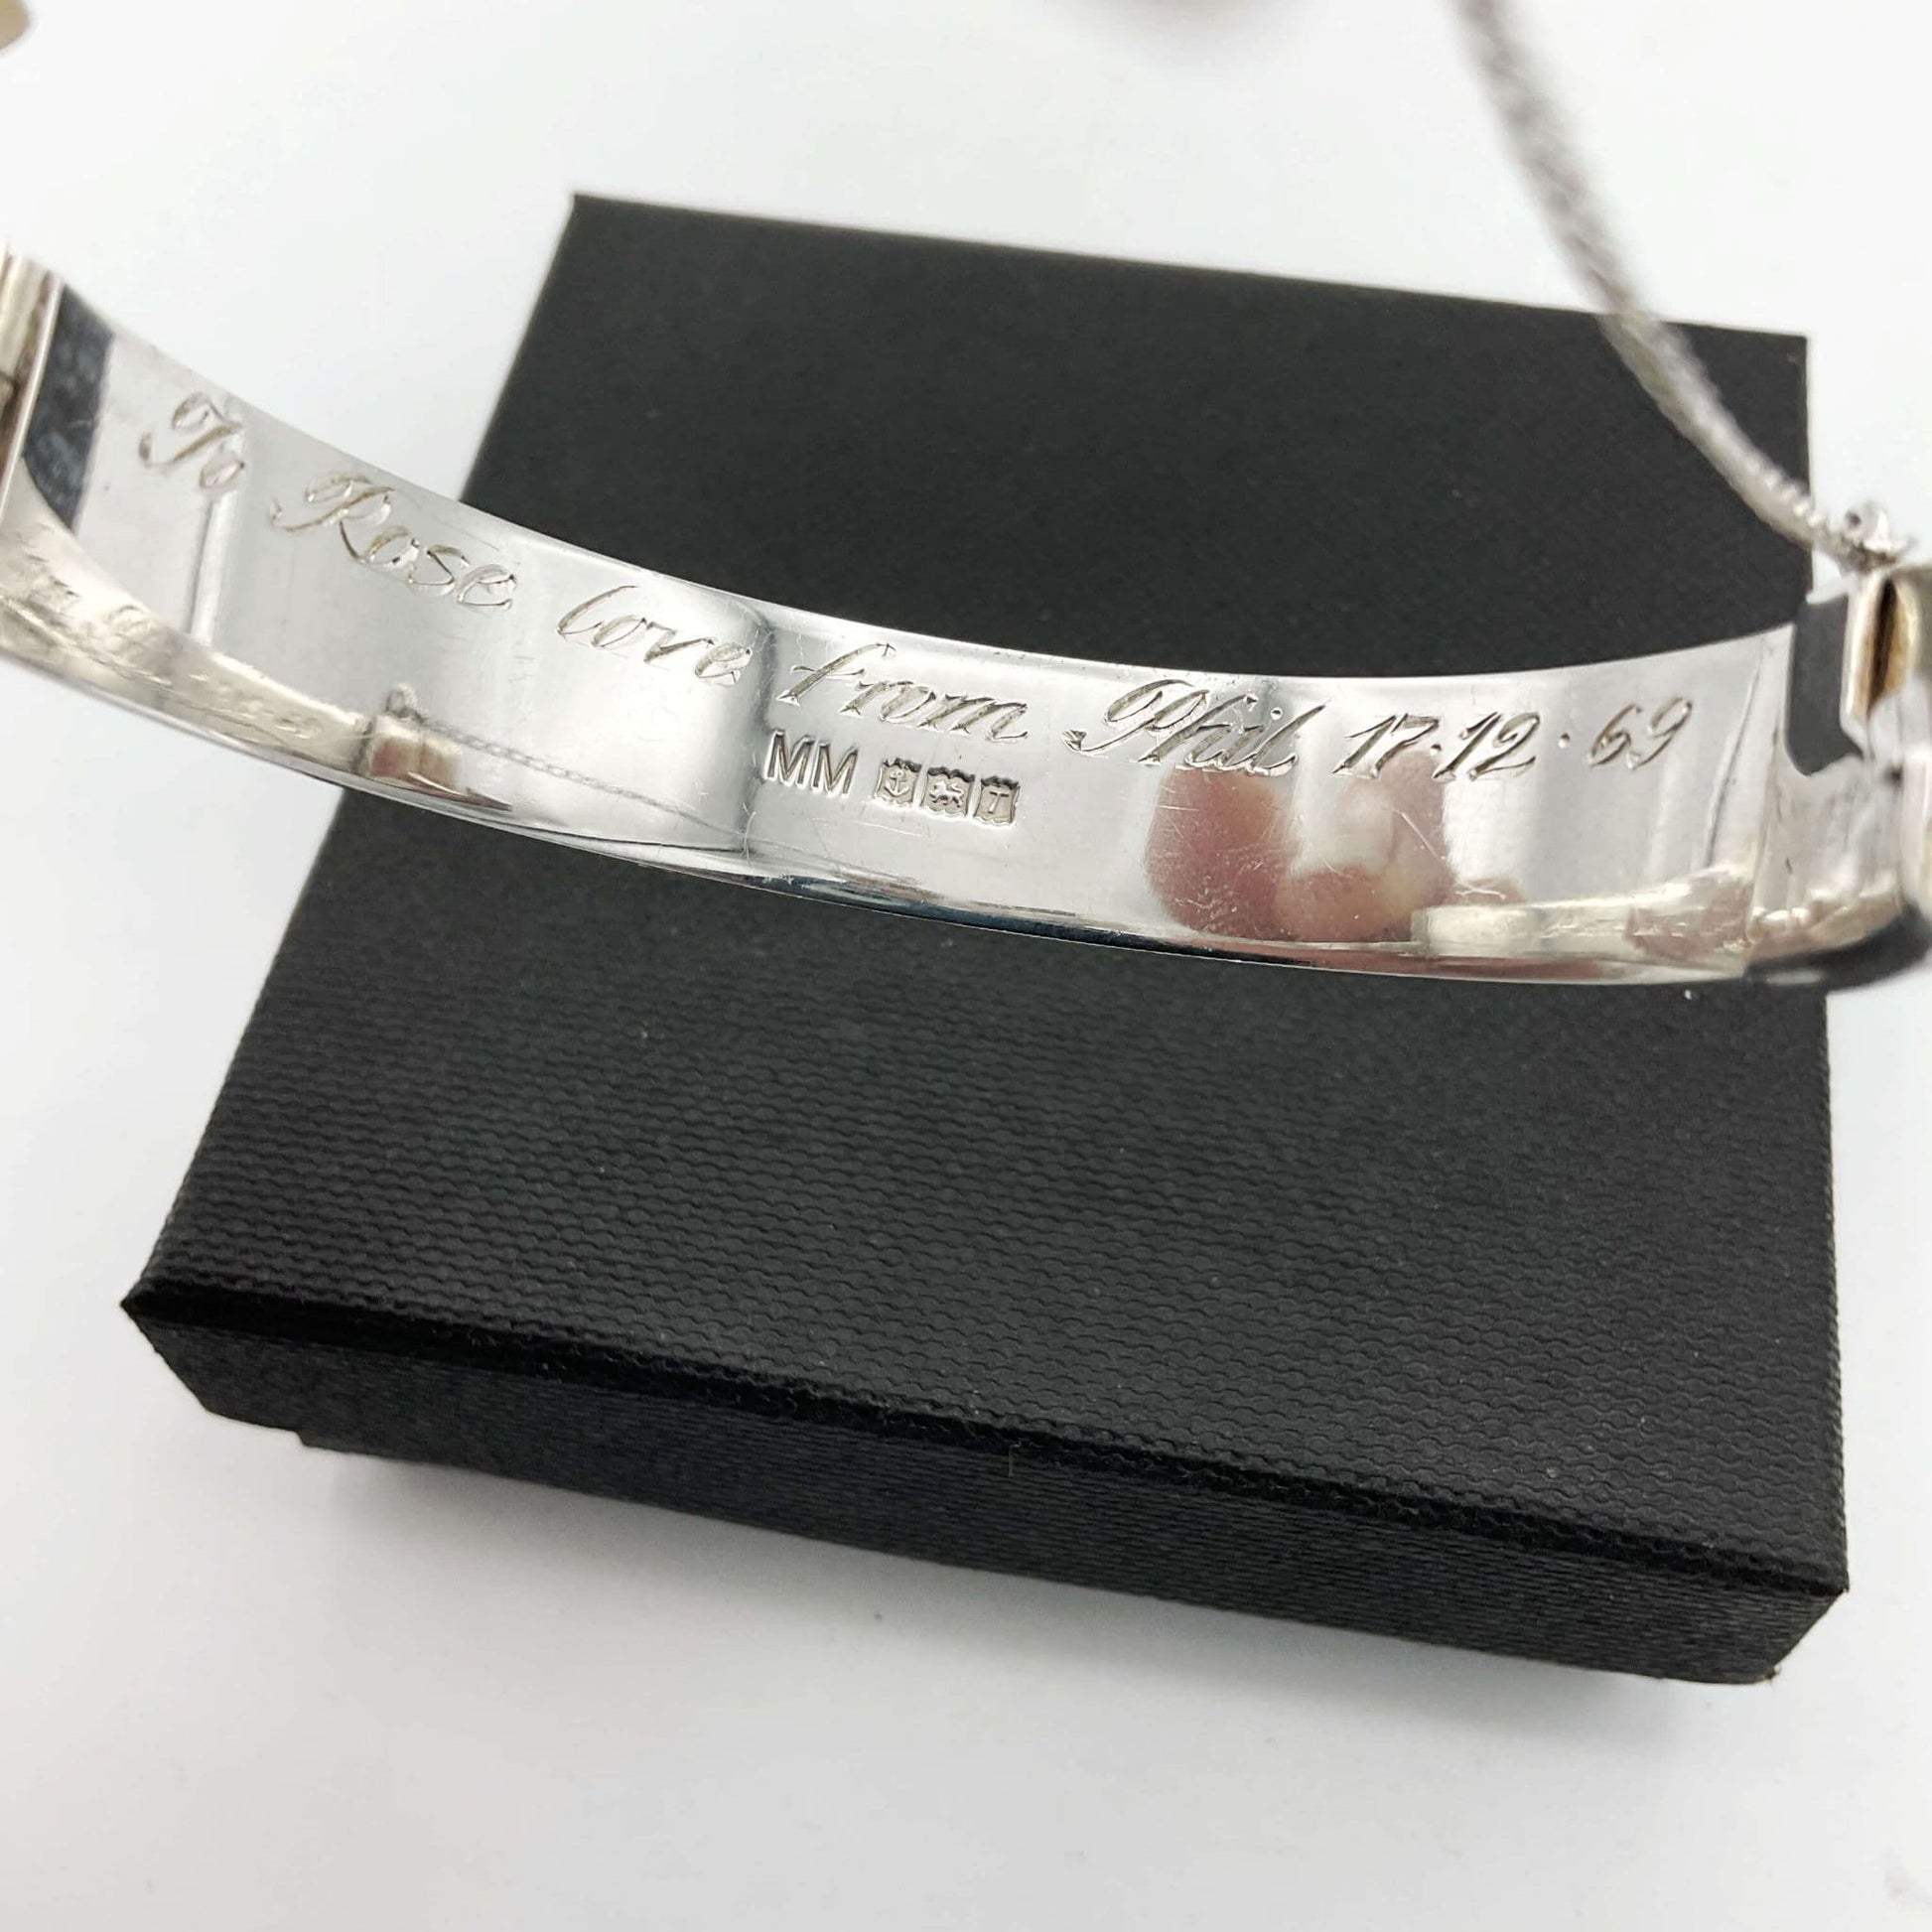 Inside of silver hinged bracelet showing the maker's mark, hallmarks and engraved message